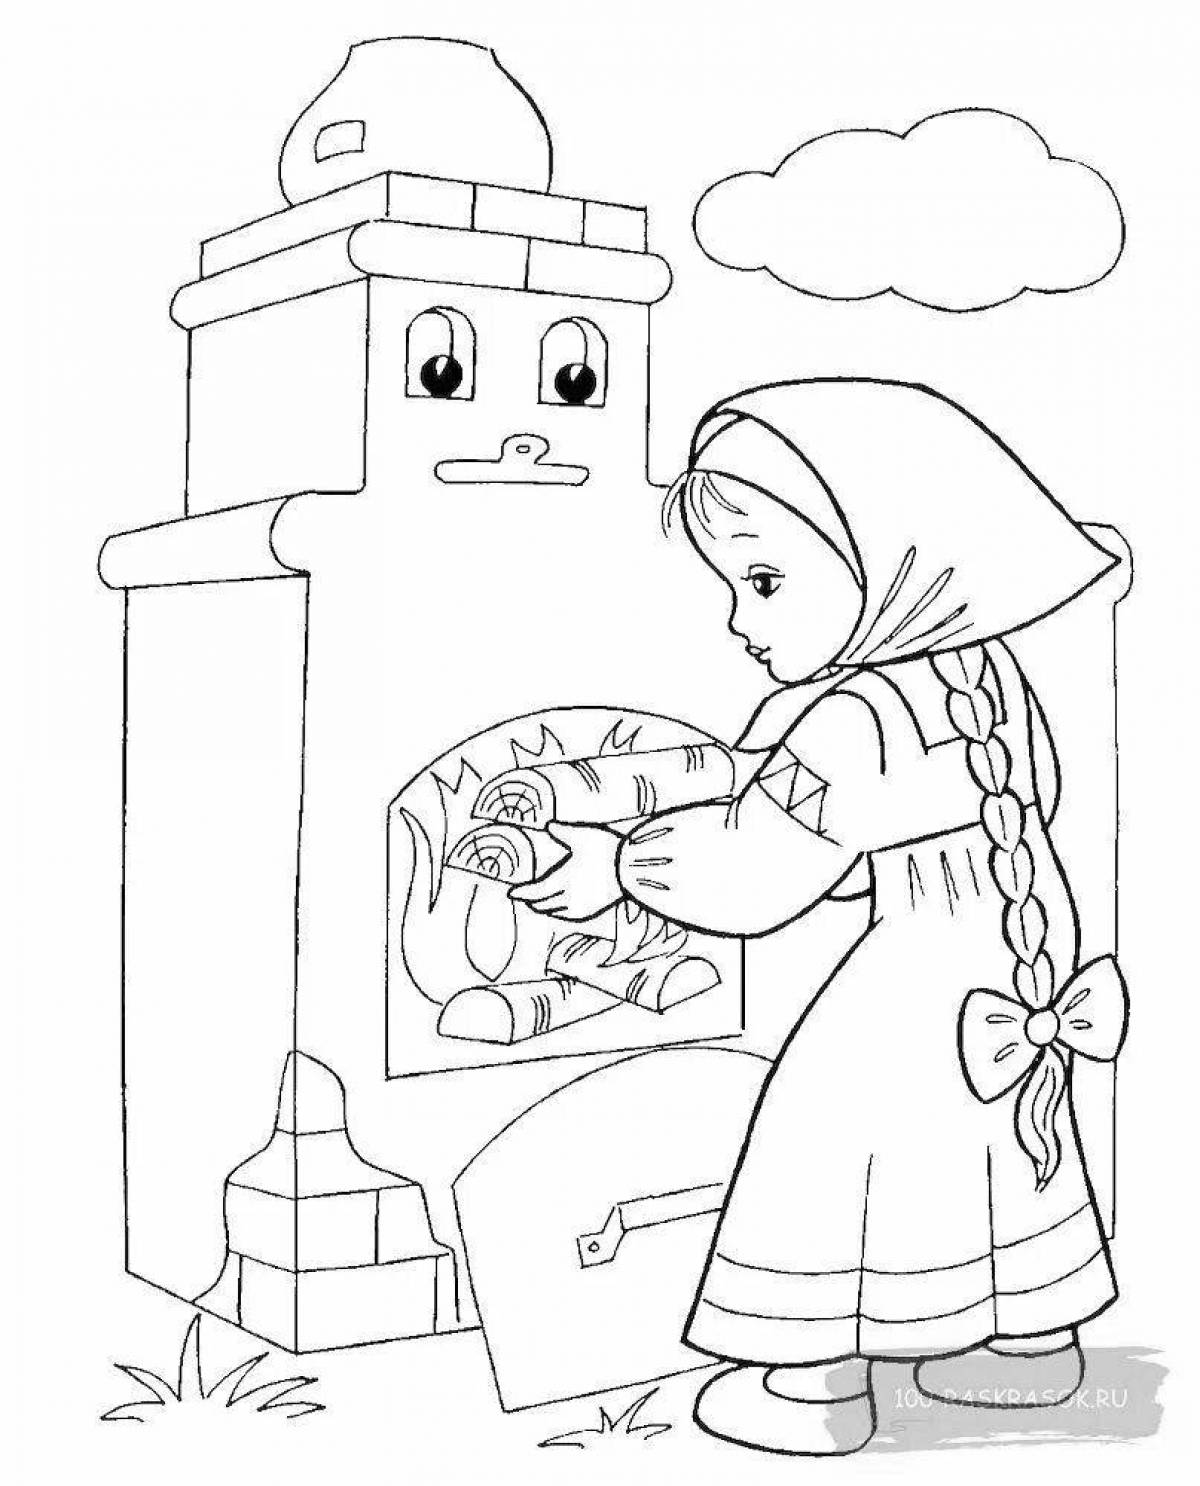 Vibrant Russian stove coloring for kids